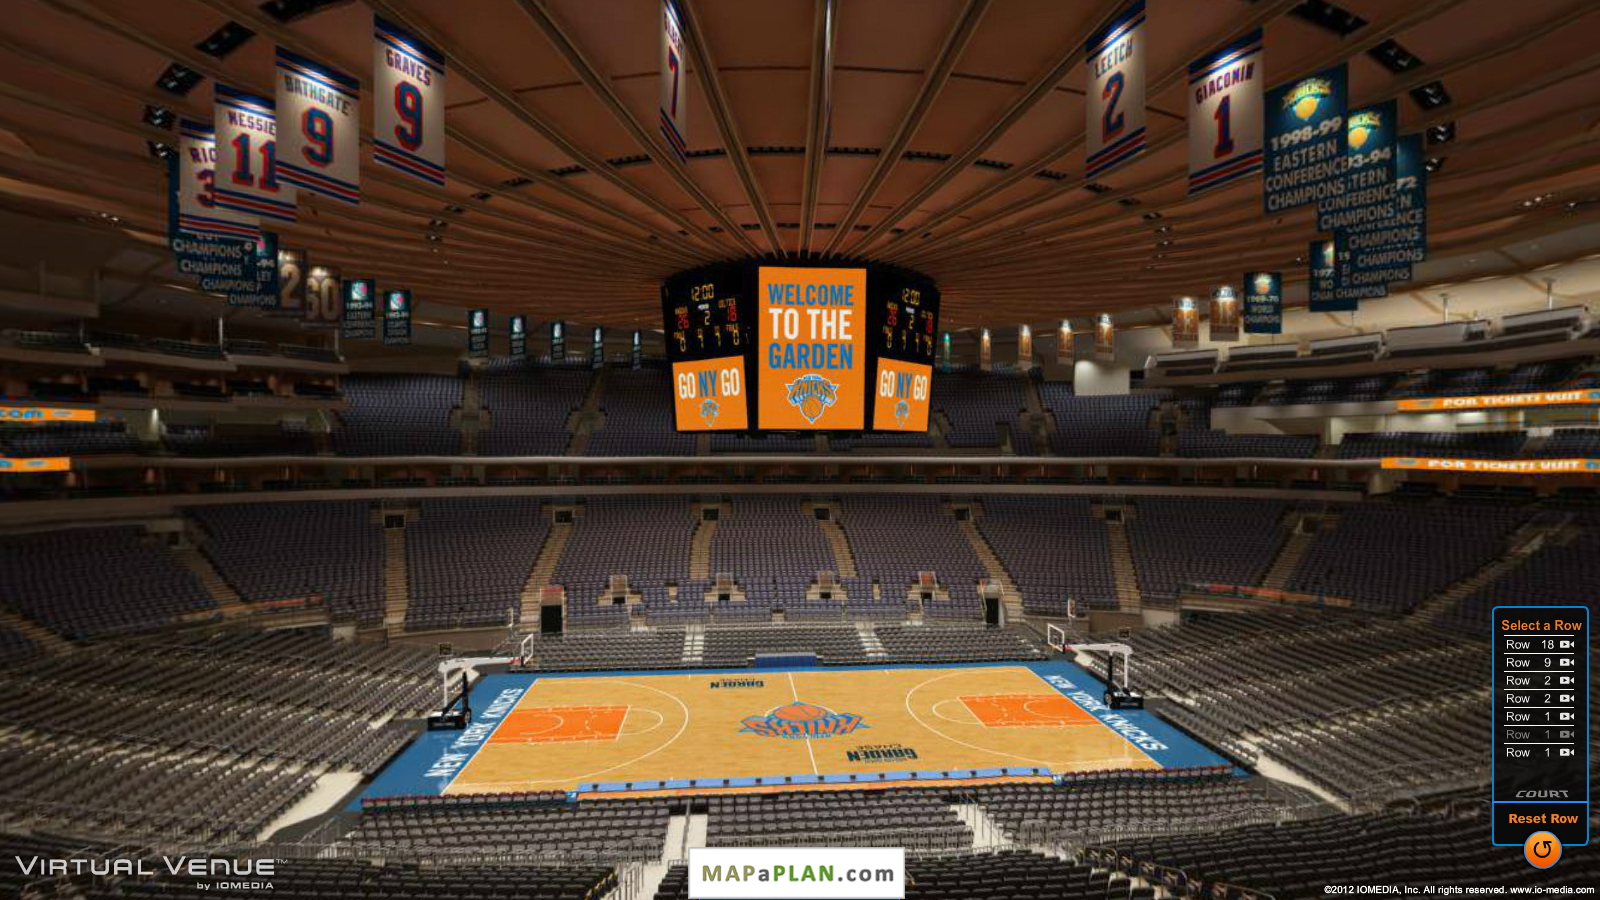 Madison square garden seating chart View from section 211